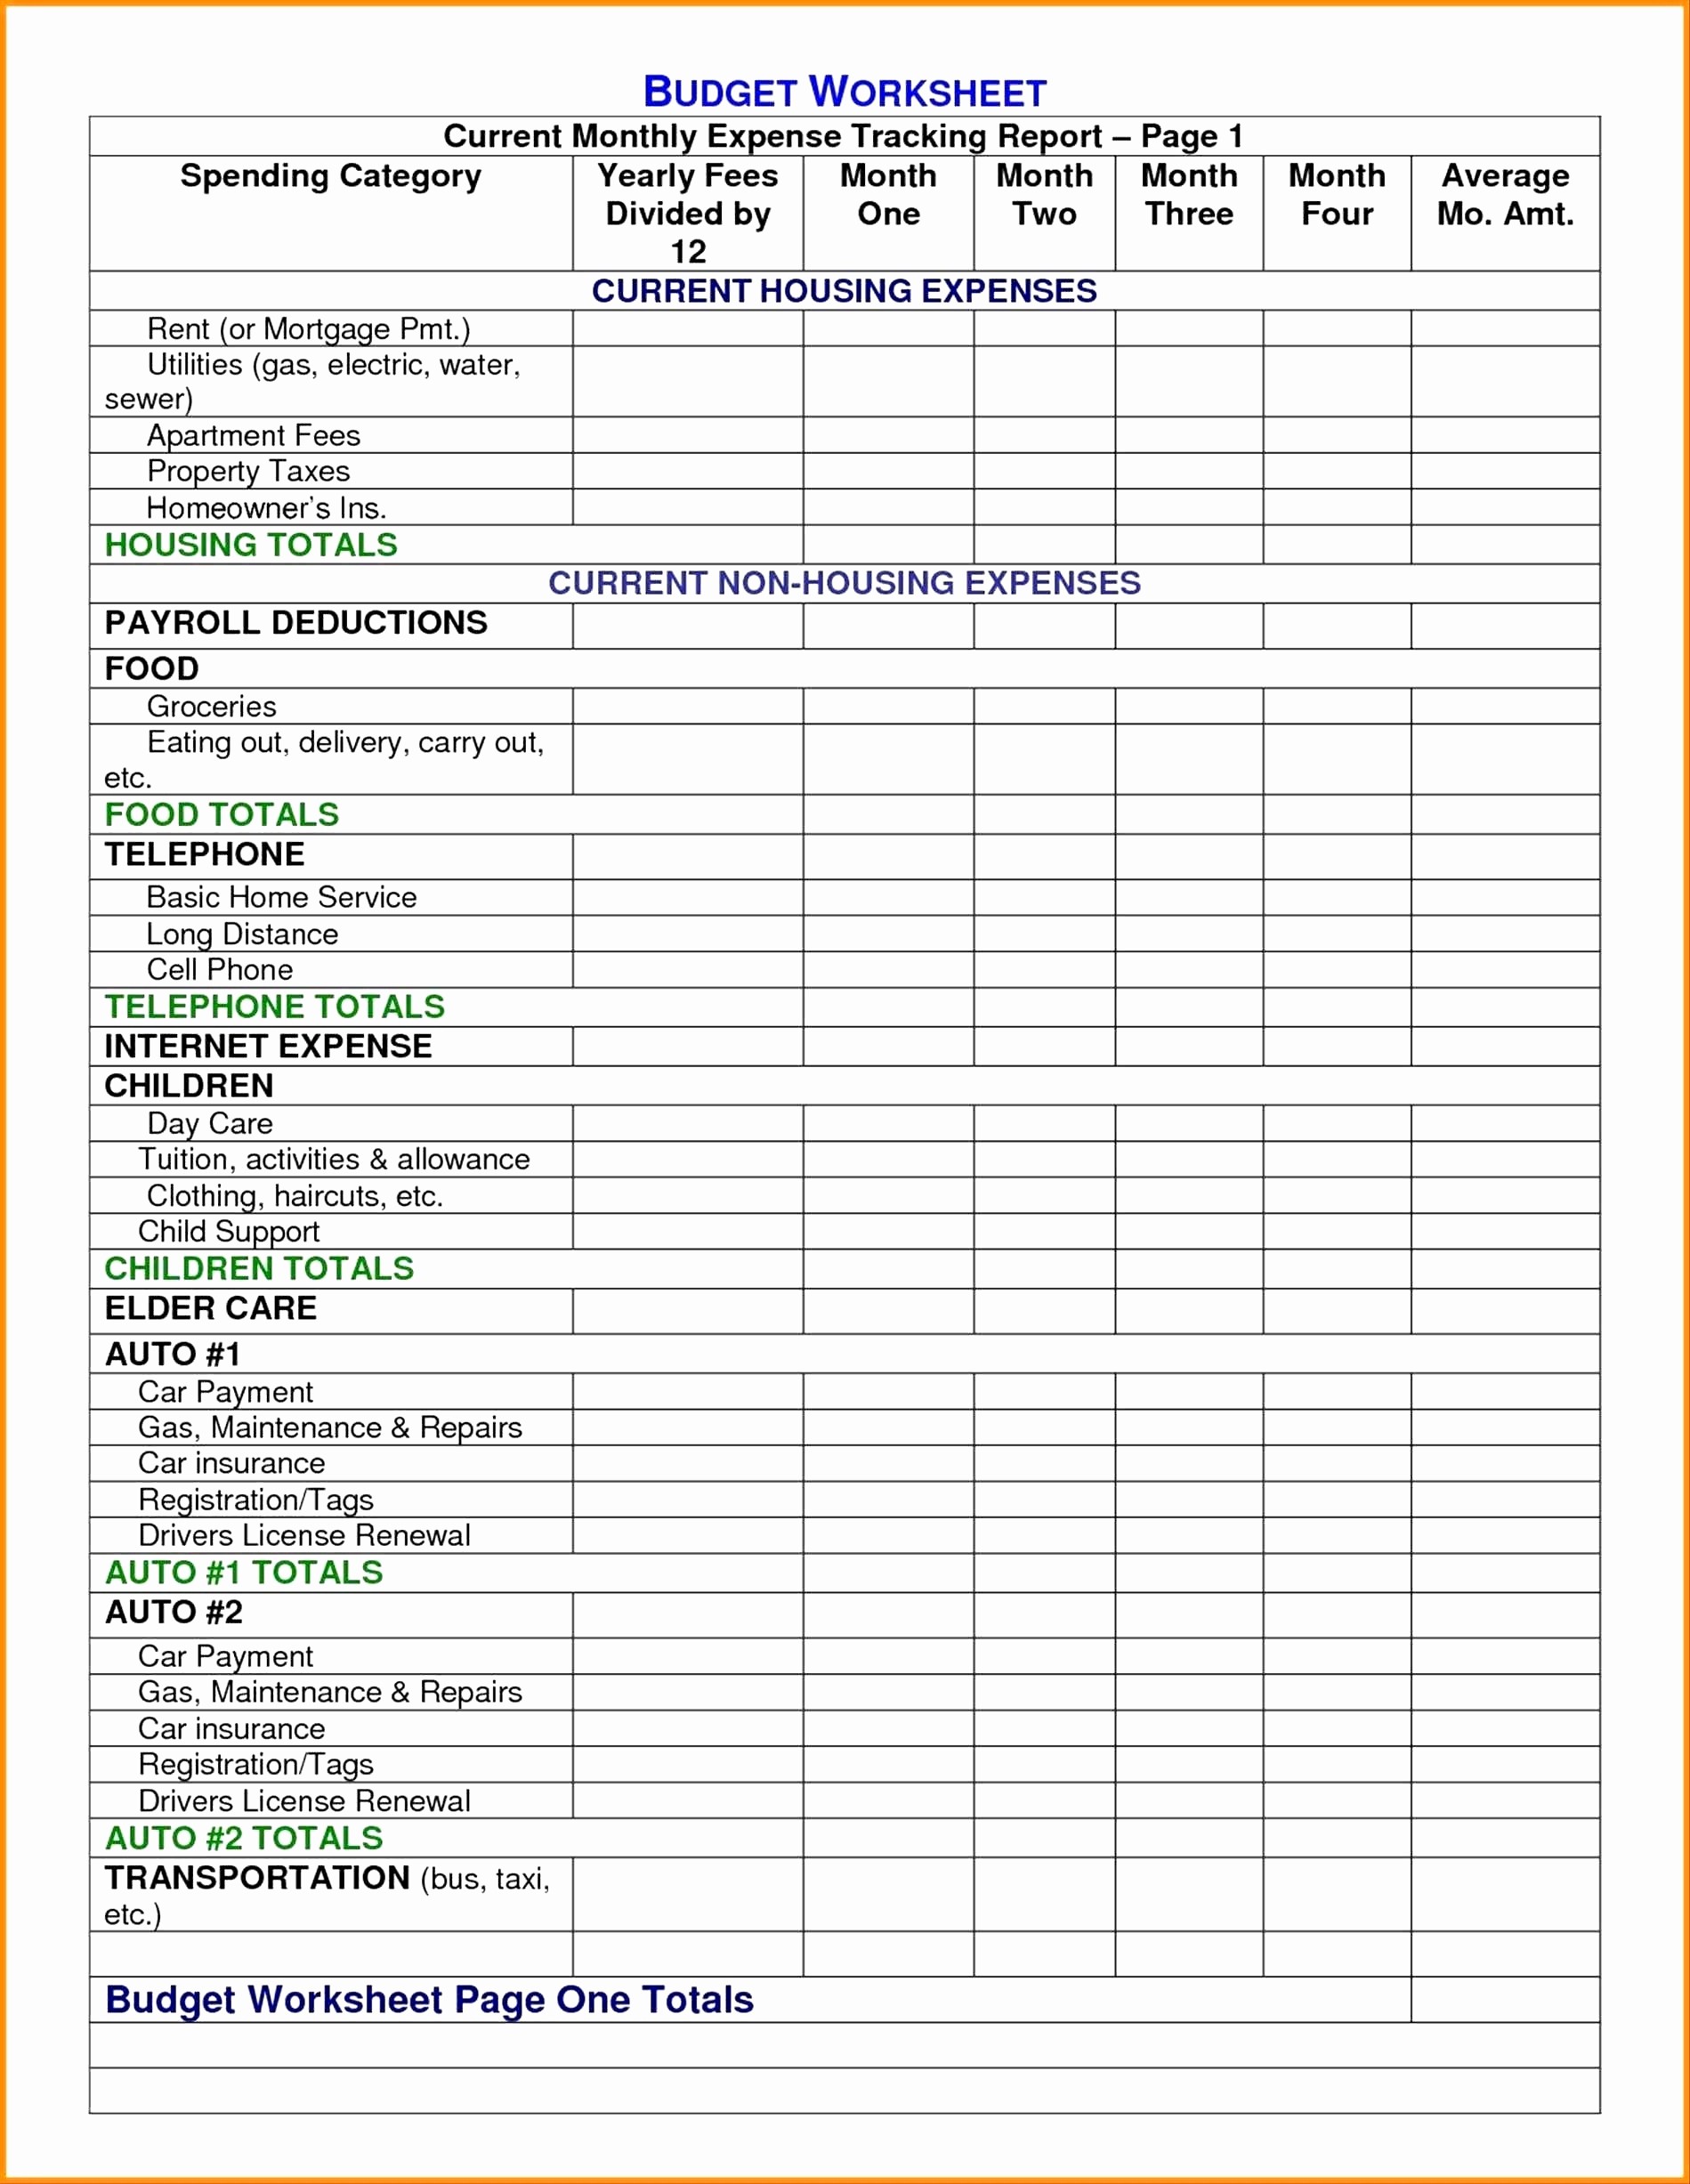 50 New Truck Driver Accounting Spreadsheet DOCUMENTS IDEAS Document